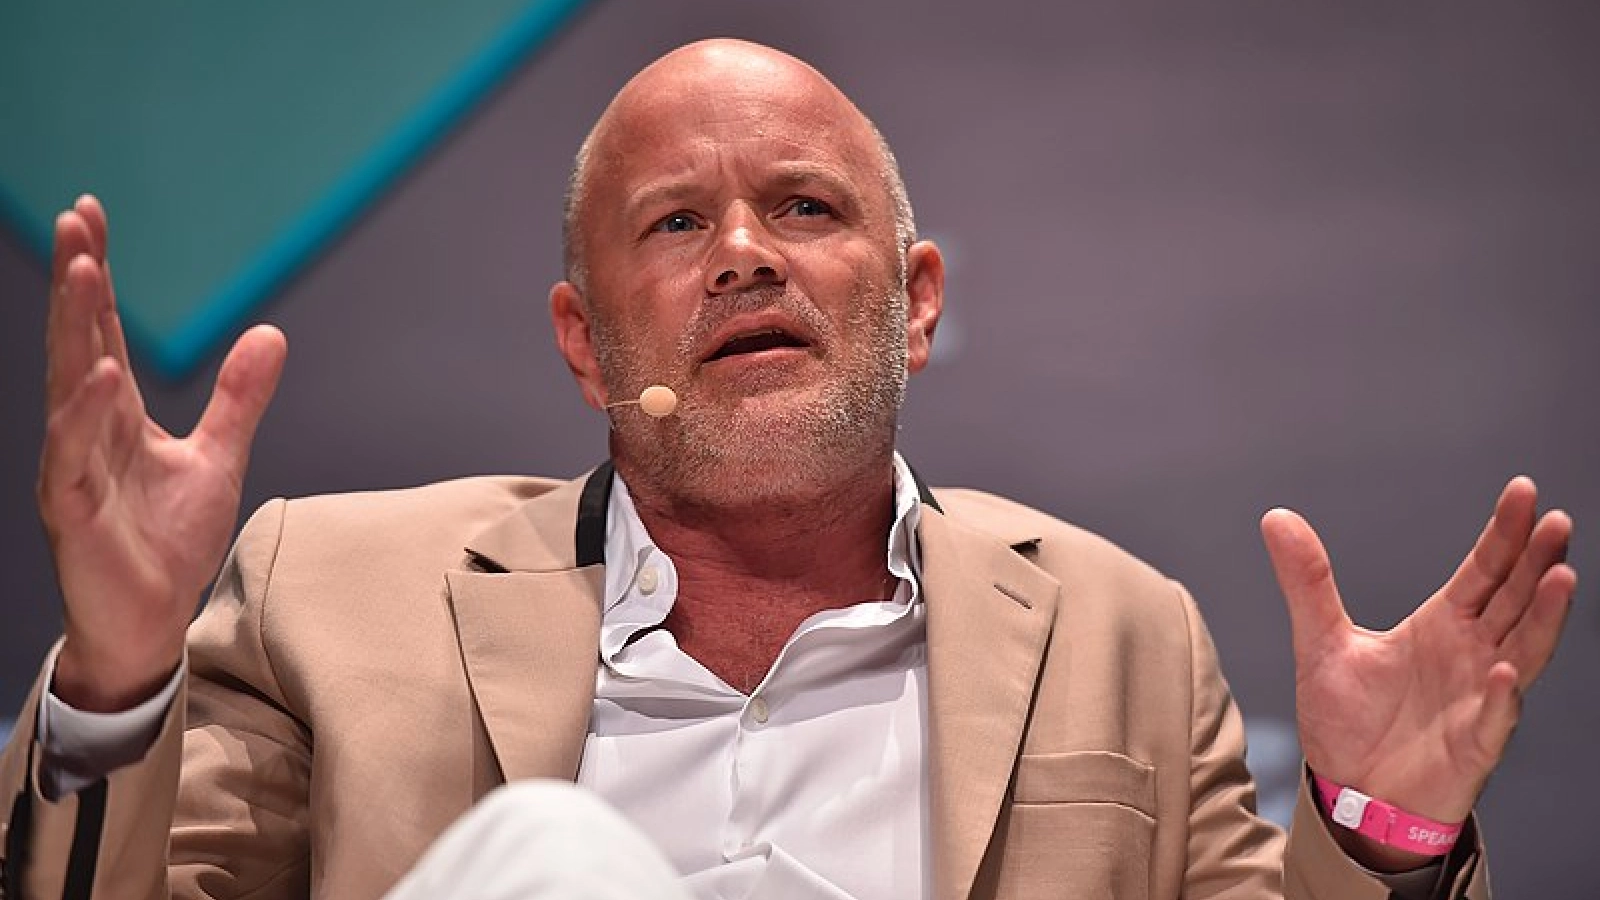 Novogratz Breaks His Silence, Speaks About His Tattoo Following the LUNA Collapse